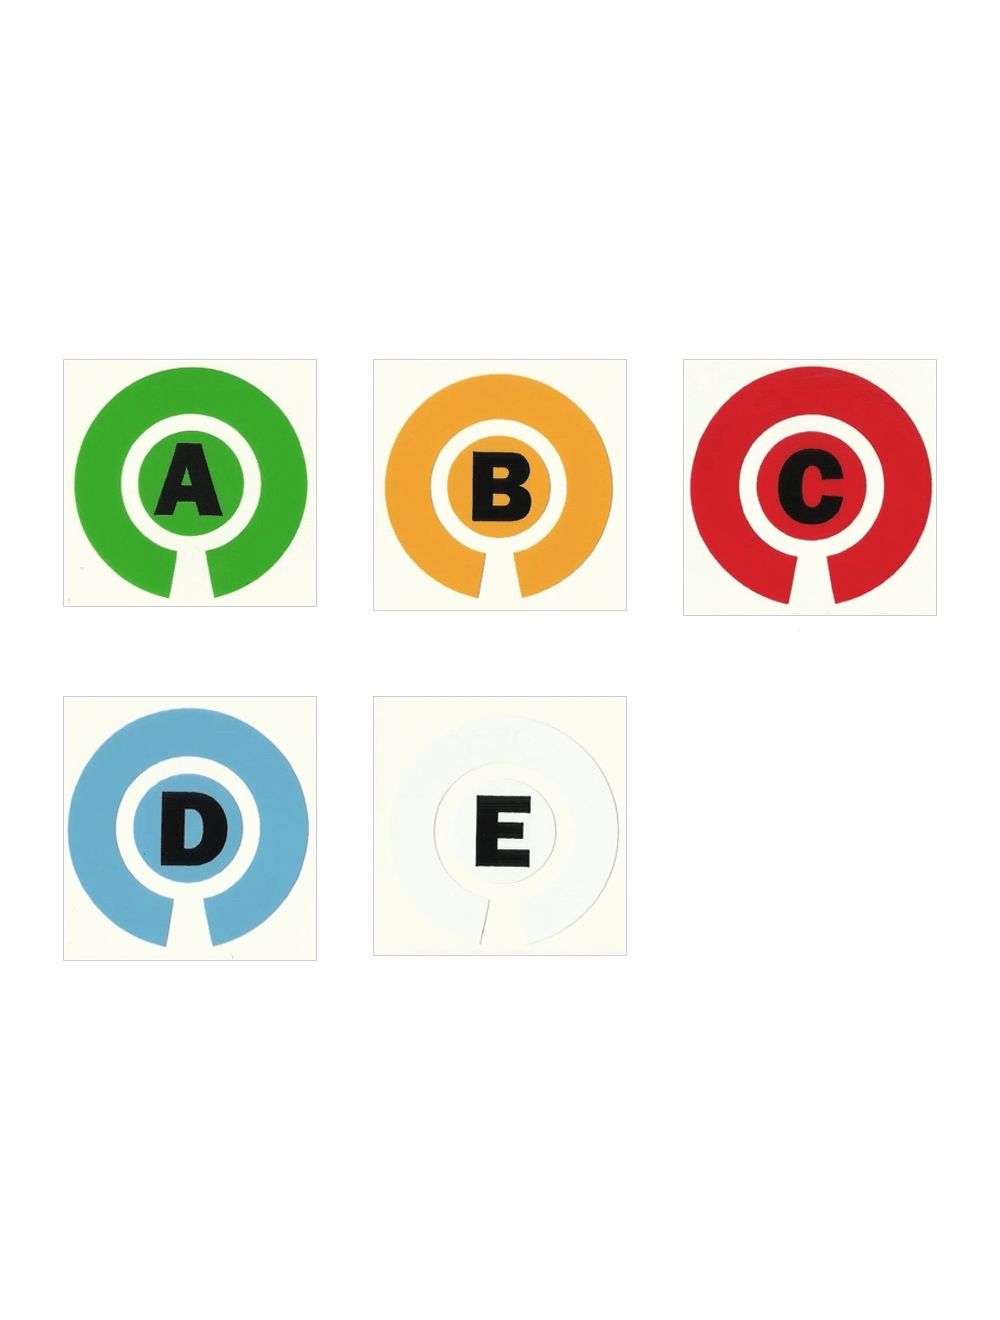 E Acclaim Lawn Bowls Identification Stickers Markers Standard 5.5 cm Diameter 4 Full Sets Of 4 Self Adhesive Two Colour Quartered Mixed Colours